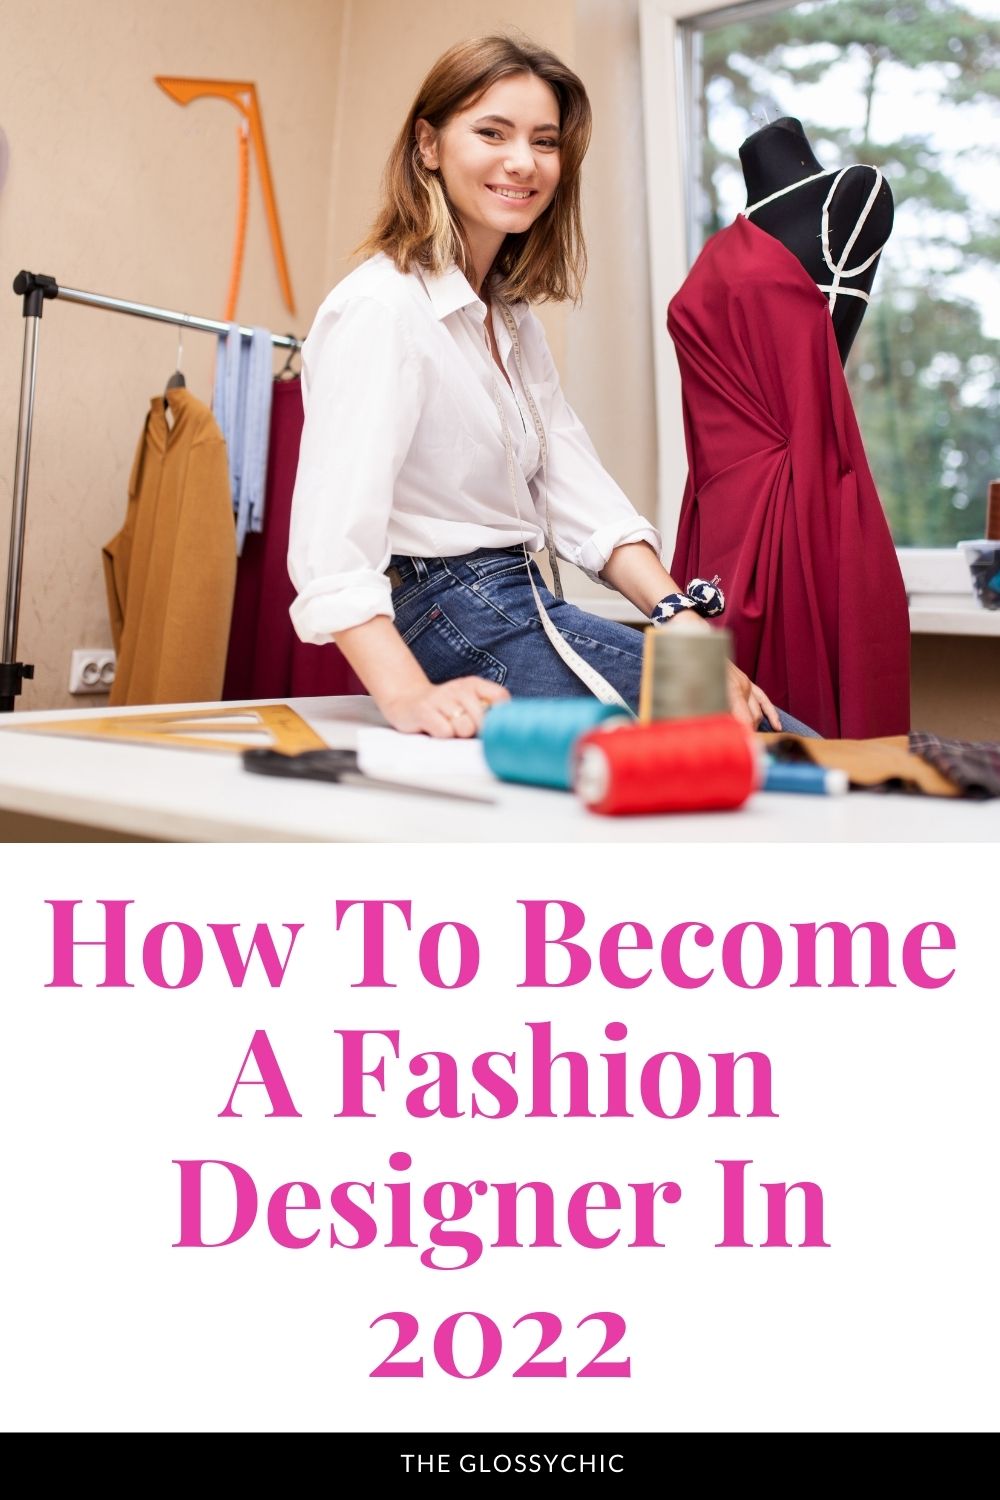 Becoming a fashion designer in 2022 is an exciting and lucrative career option. There are numerous opportunities for designers to work in large and small companies and freelance projects. The field of fashion design offers many unique challenges and rewards, making it one of the most rewarding careers available.